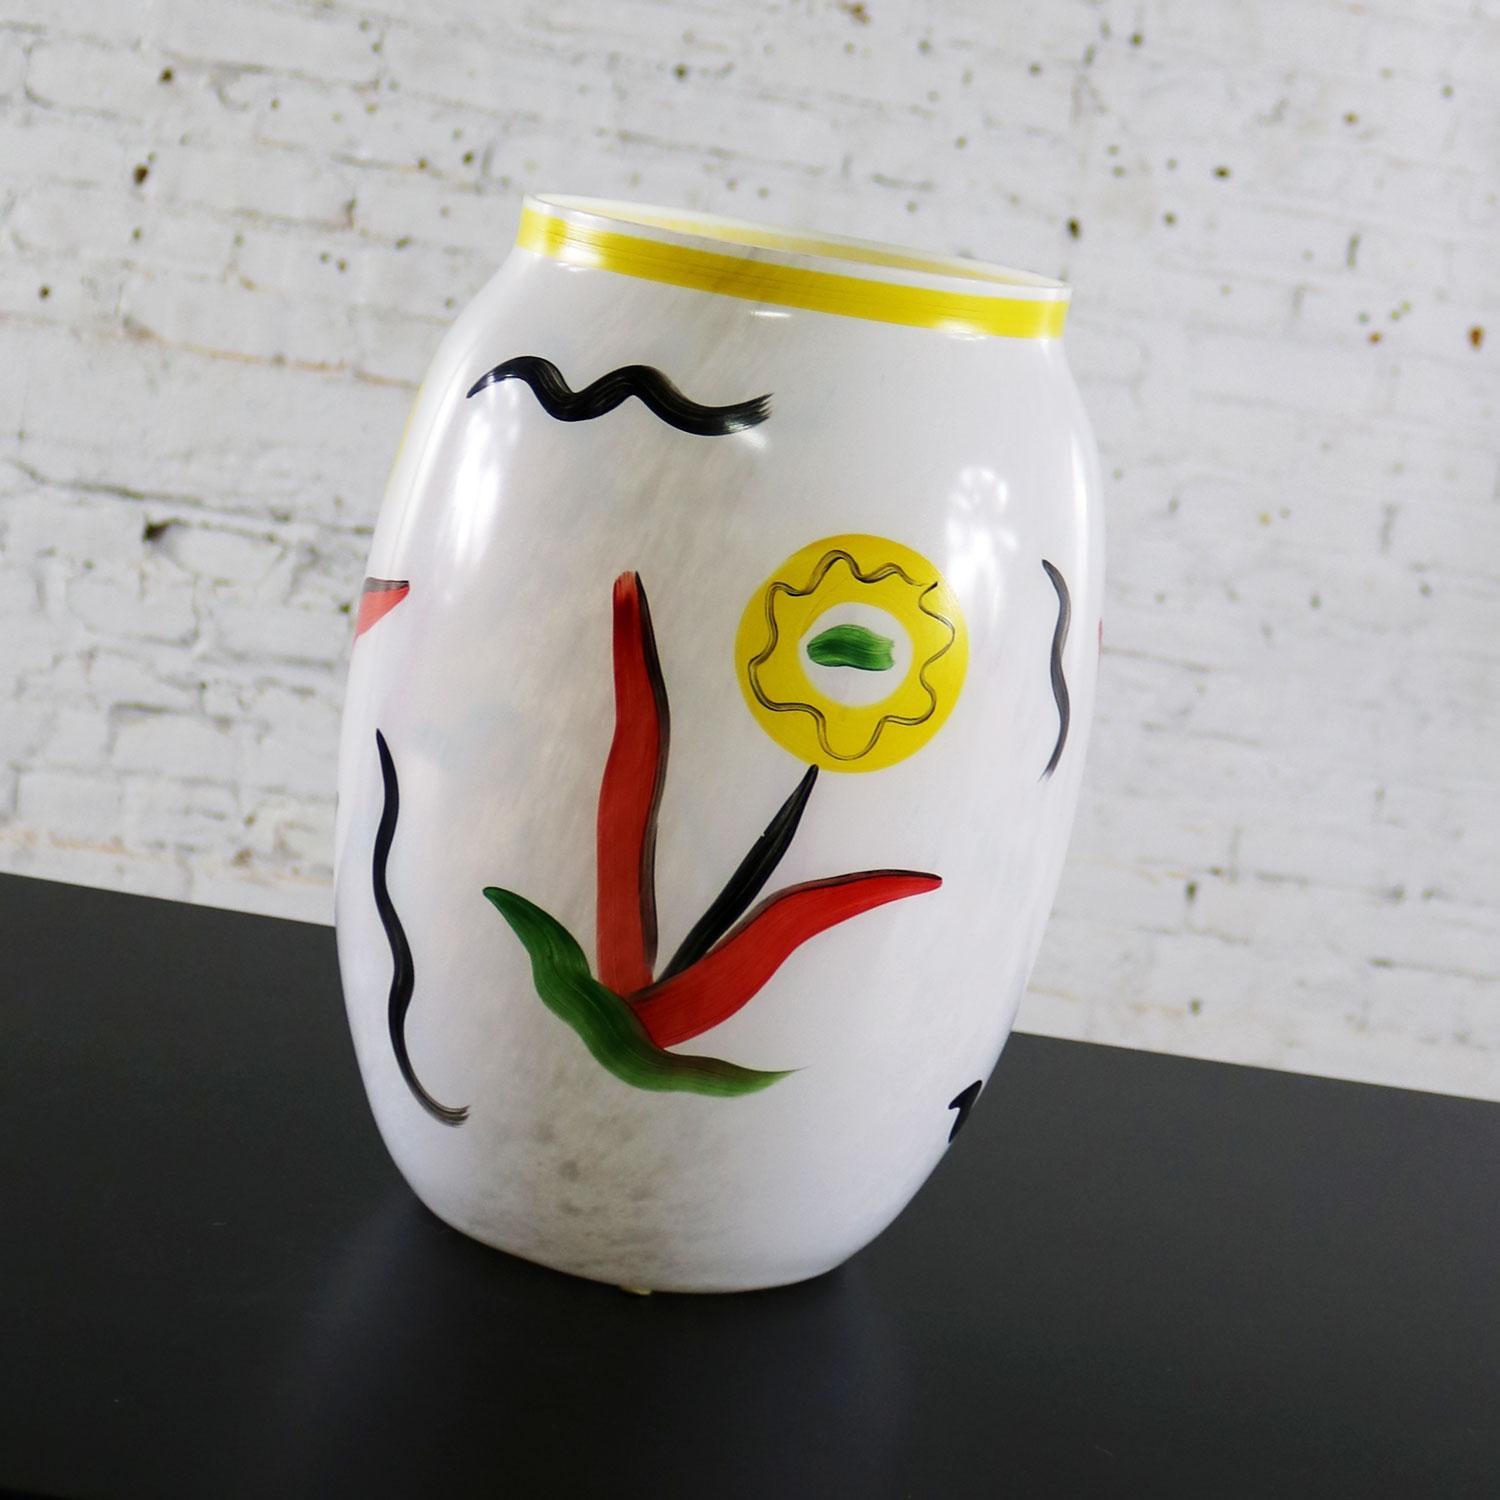 Gorgeous very large hand painted vase depicting impressionistic colorful flowers on a white background by Ulrica Hydman-Vallien for Kosta Boda Atelier. This is a limited-edition vase signed by the artist and numbered 8UHVAT 964001/300. It is in